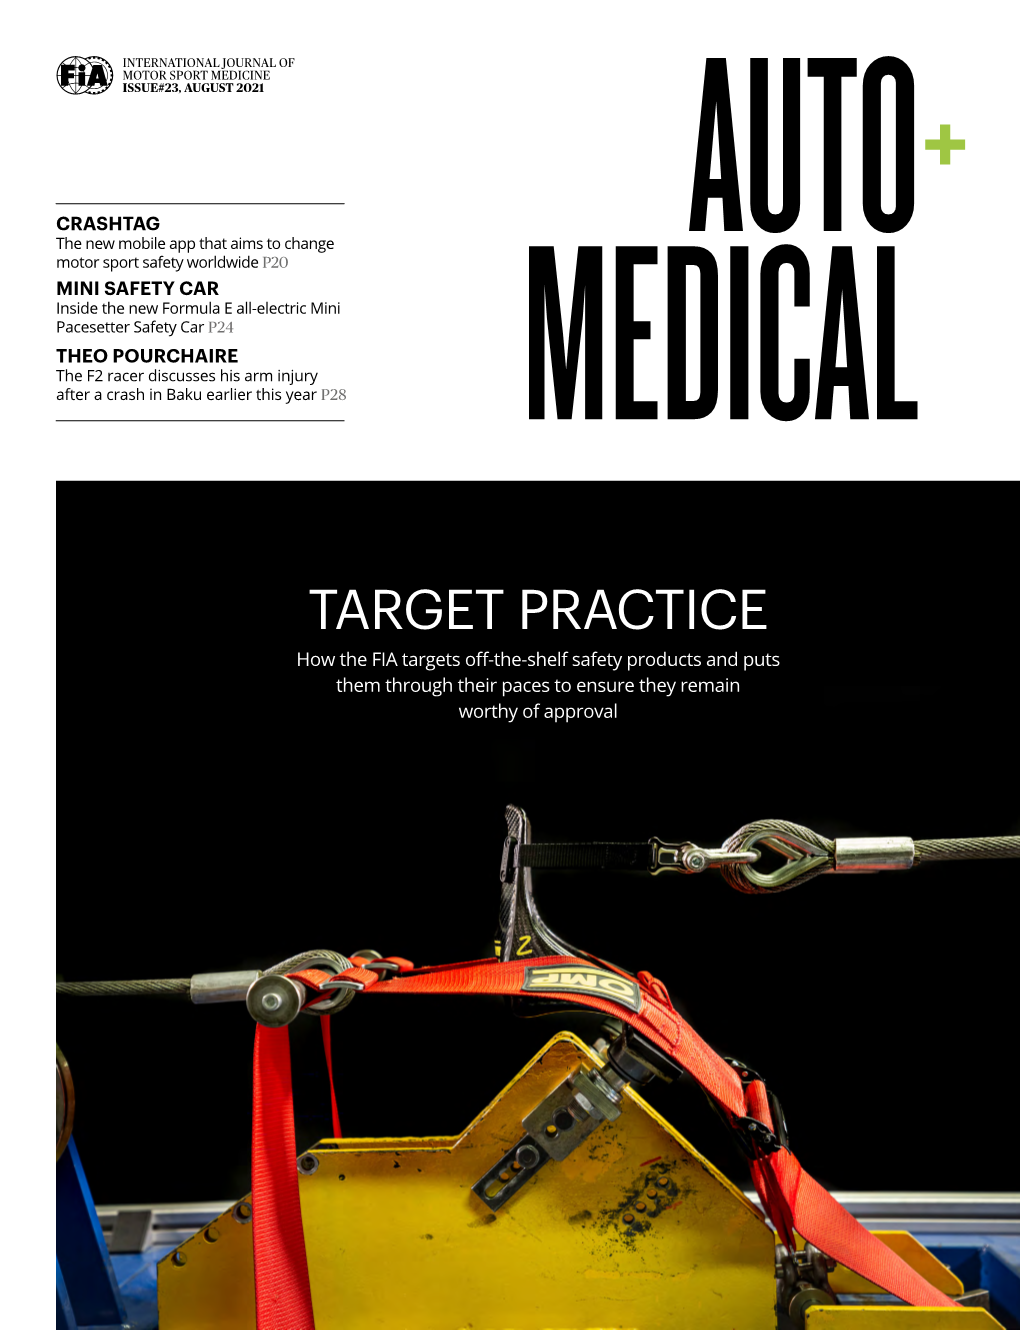 TARGET PRACTICE How the FIA Targets Off-The-Shelf Safety Products and Puts Them Through Their Paces to Ensure They Remain Worthy of Approval AUTO+MEDICAL AUTO+MEDICAL